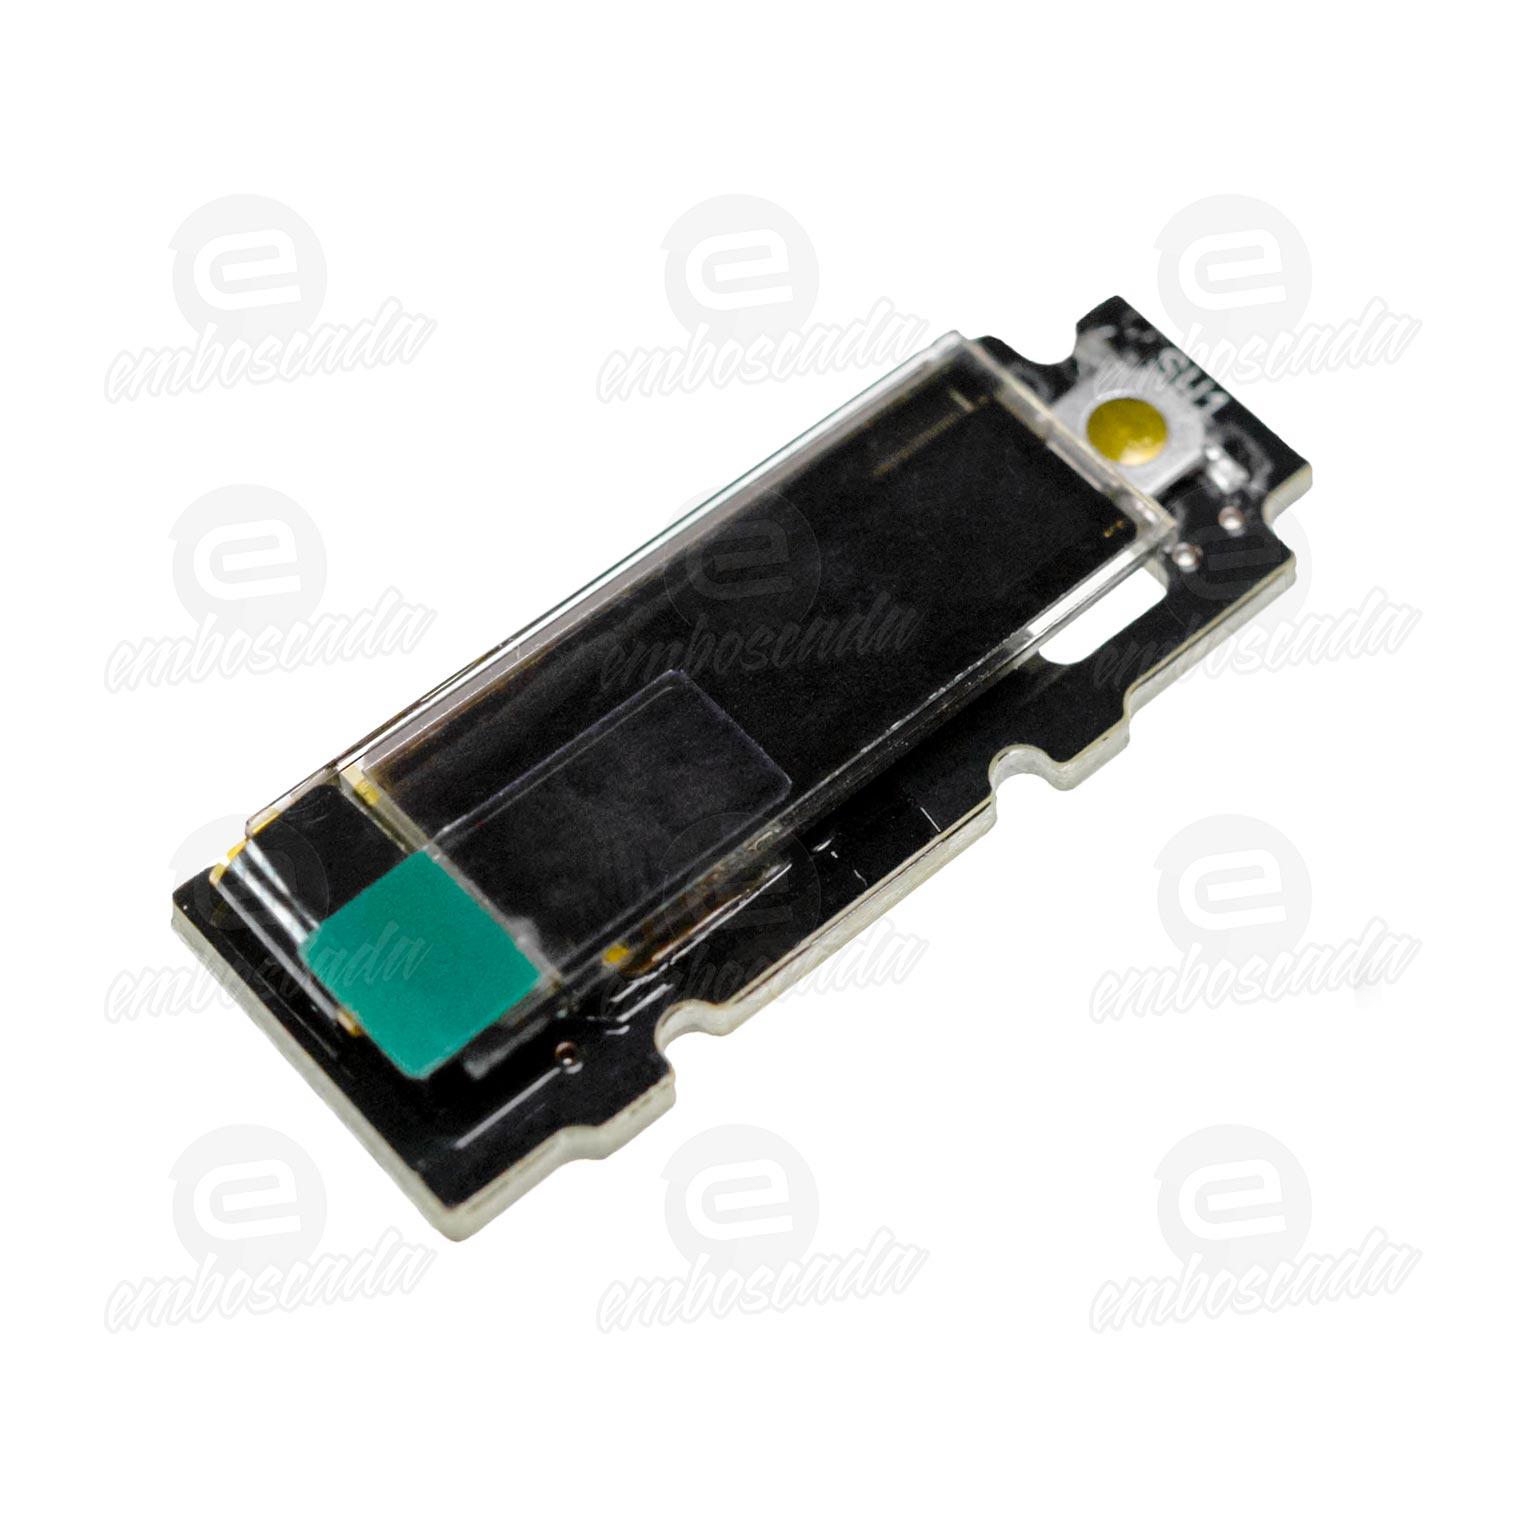 DLX Luxe ICE/OLED Spare Part: OLED Display Board